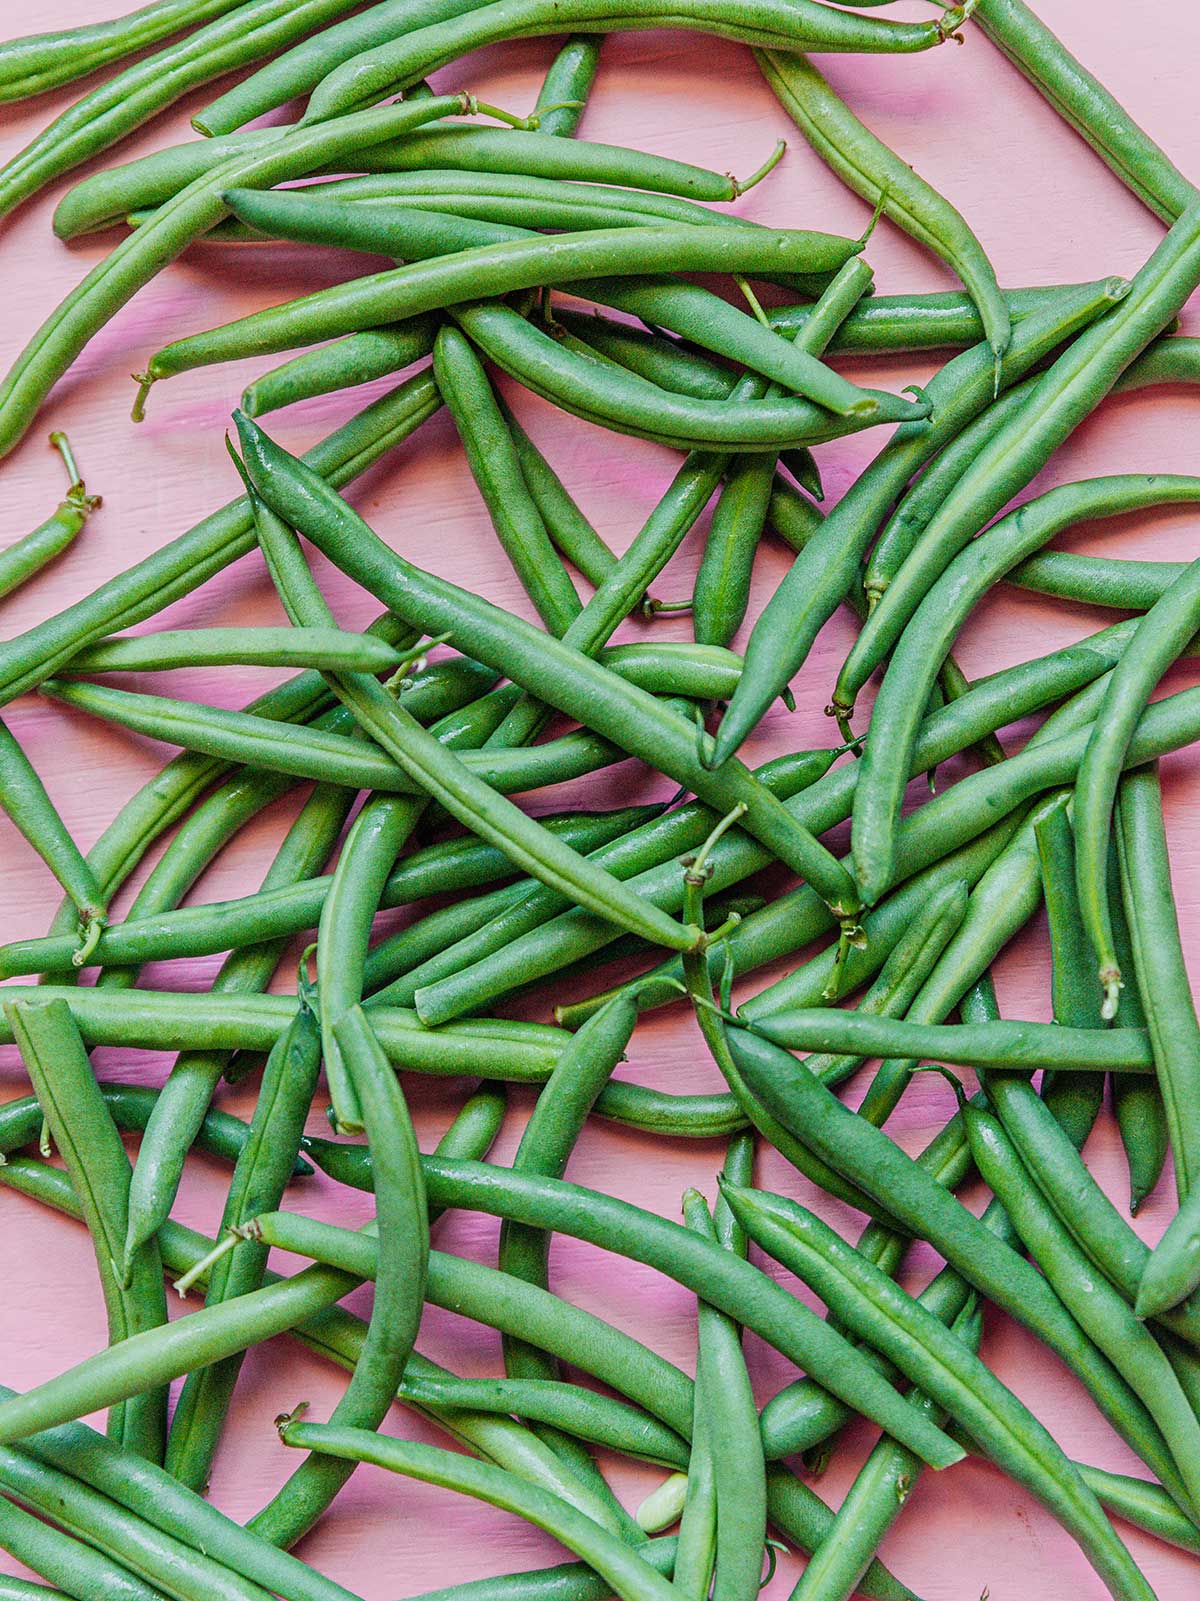 A bed of green beans laid out on a pink background